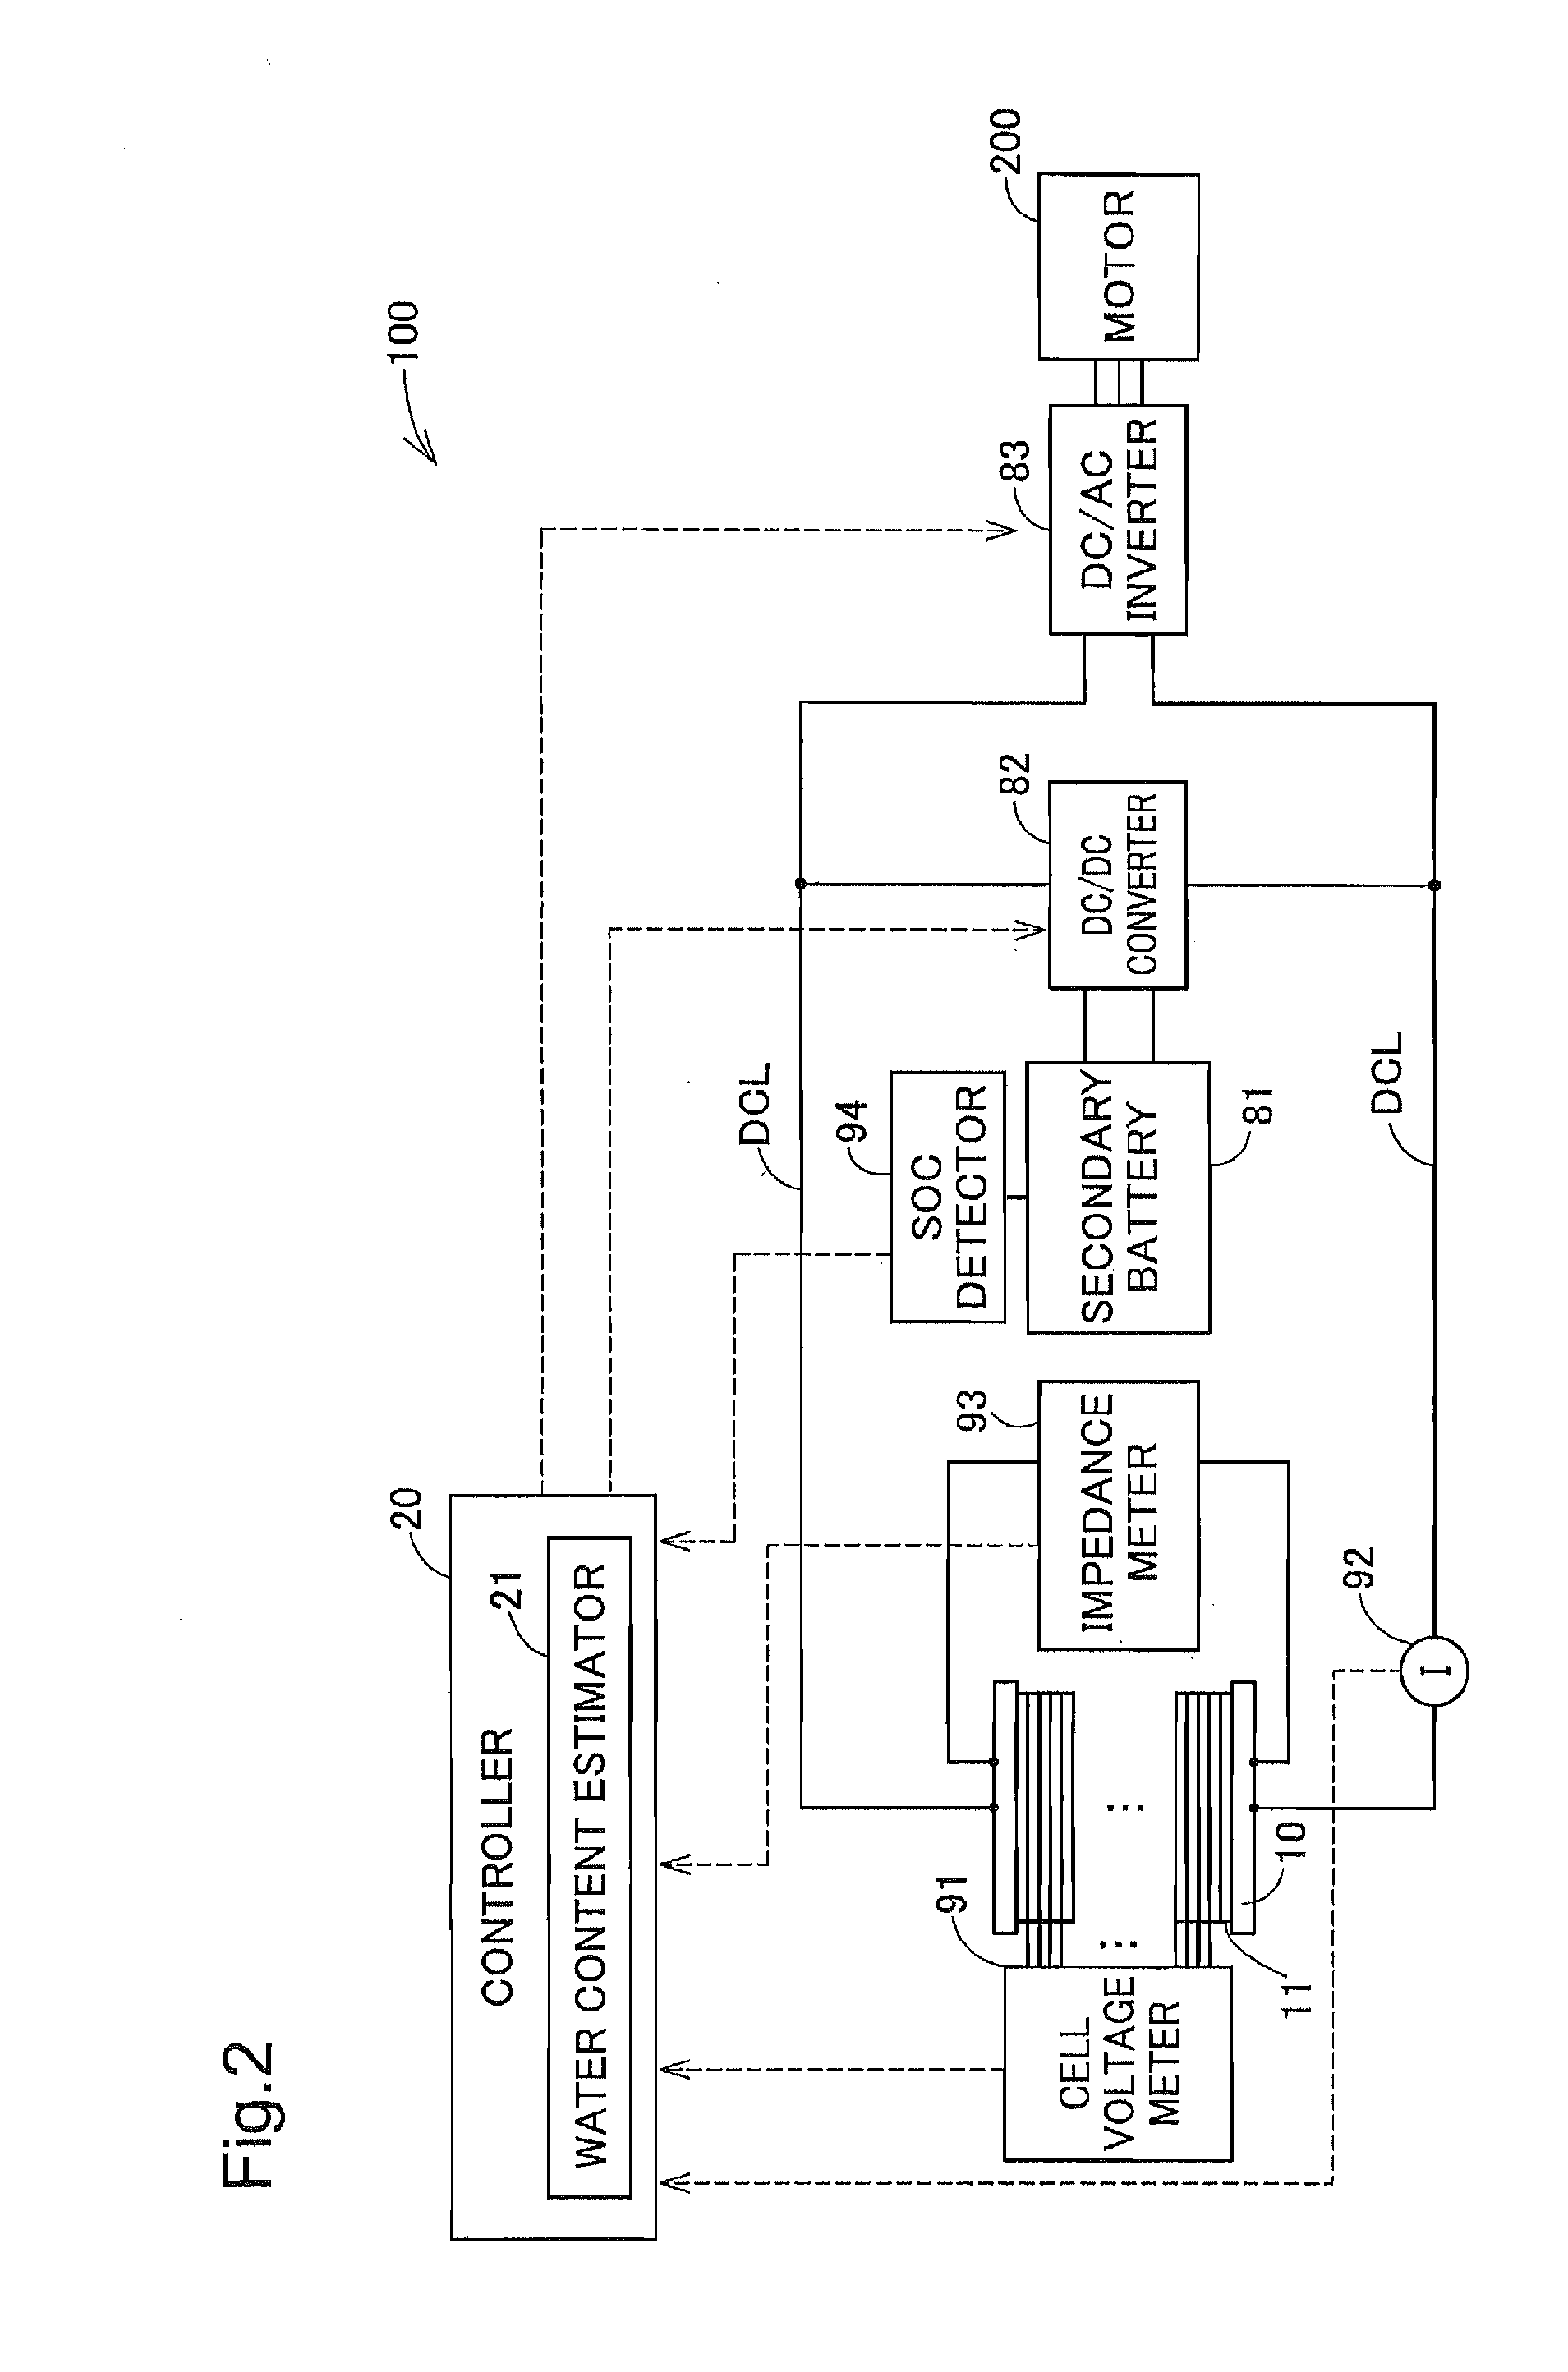 Method of estimating amiount of liquid water in fuel cell, method of estimating amount of liquid water discharged from fuel cell, estimation apparatus of liquid water amount in fuel cell and fuel cell system